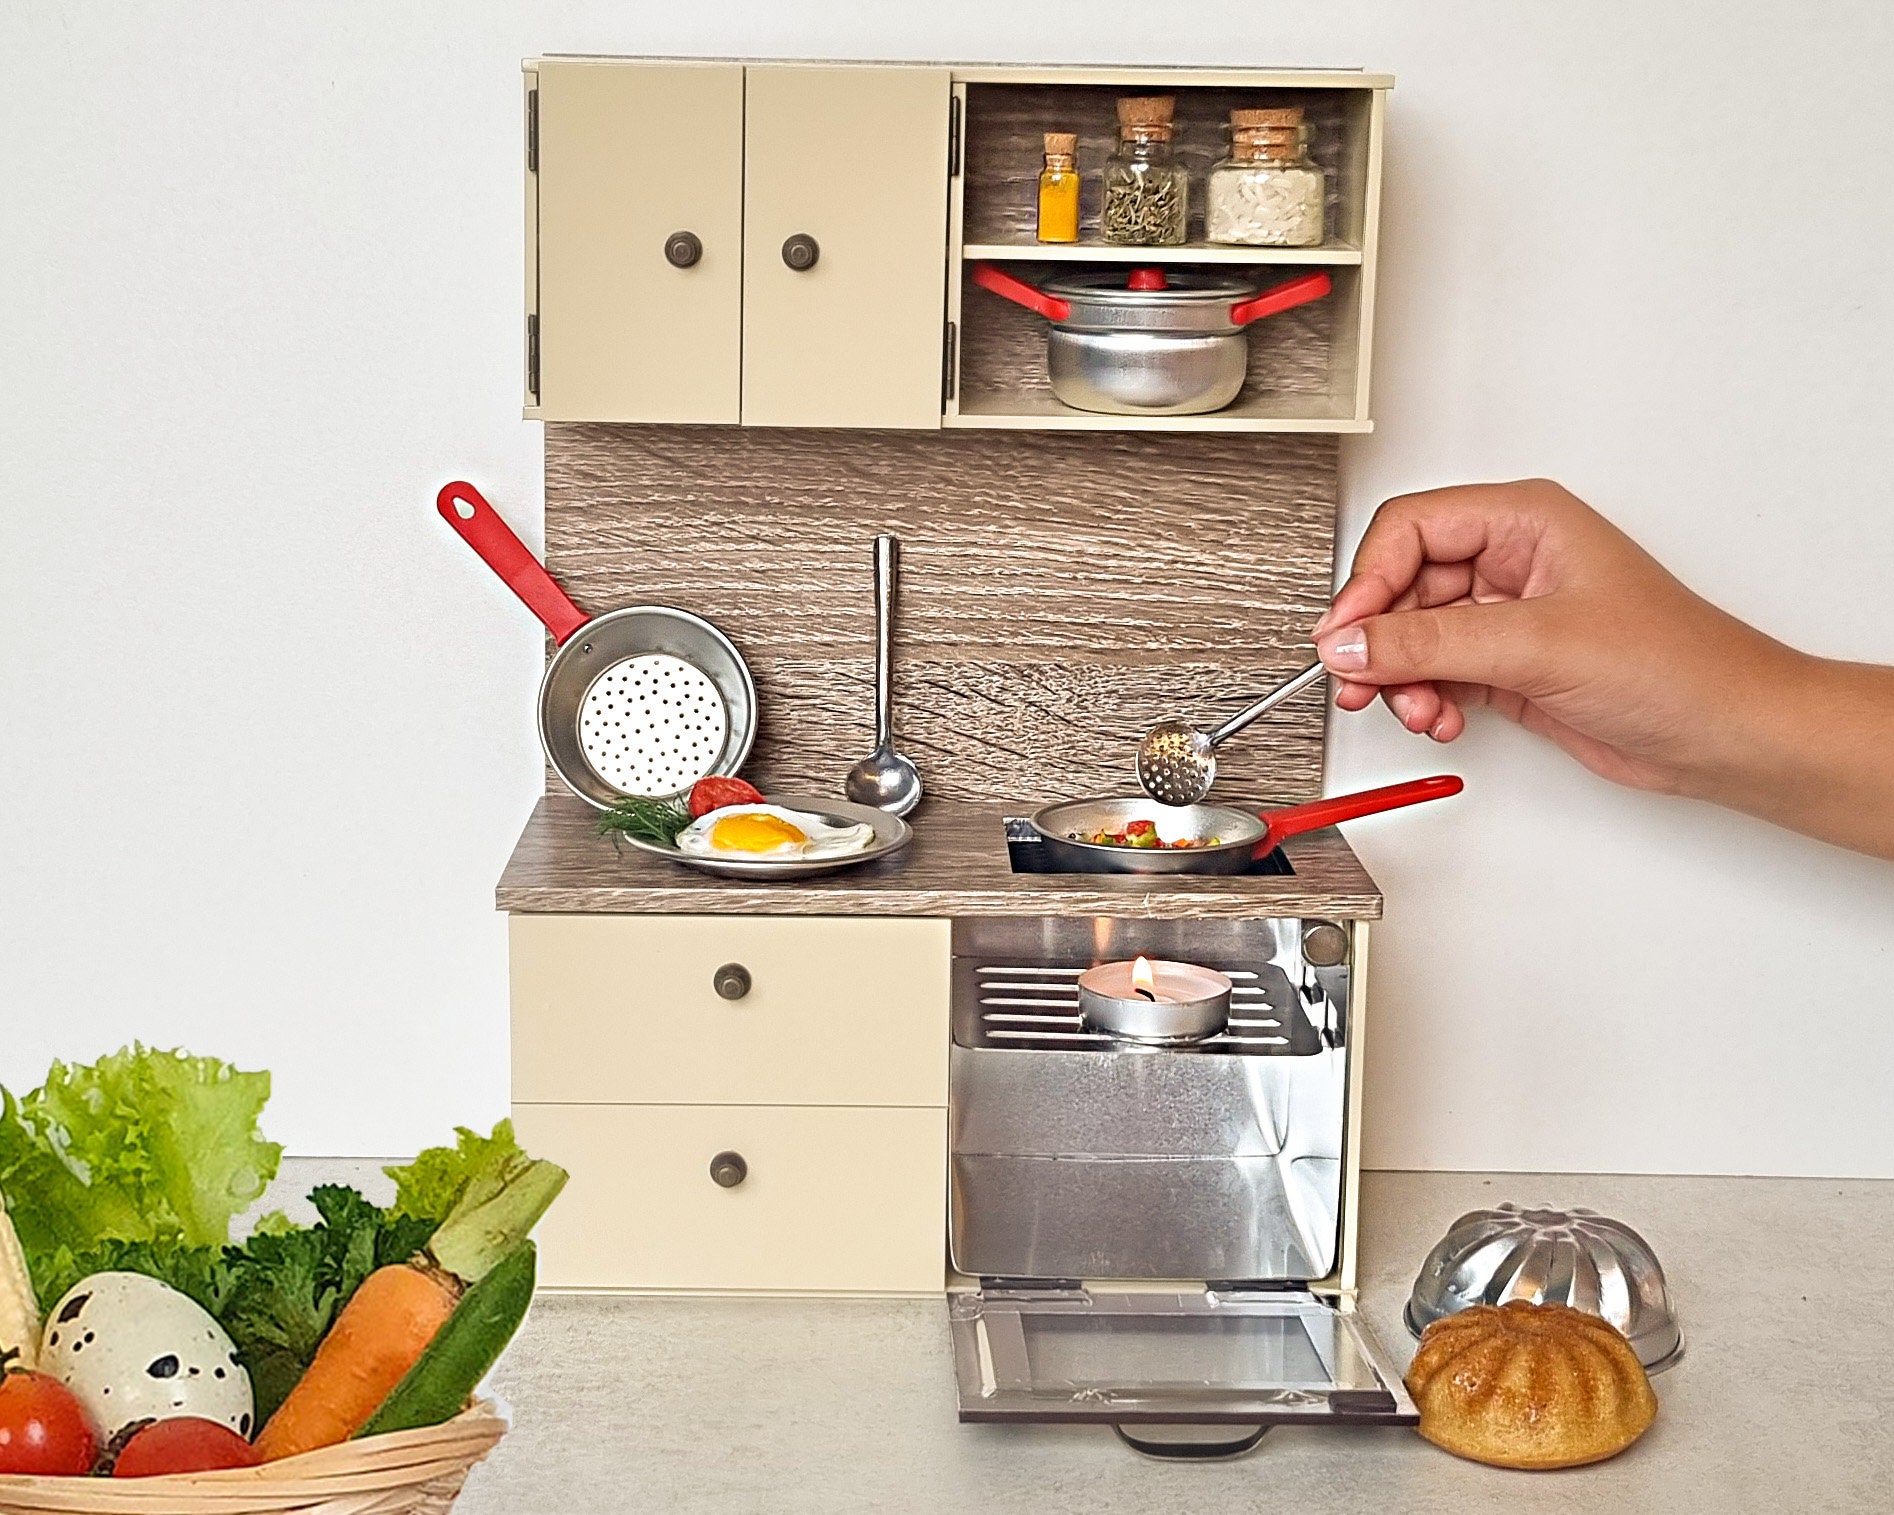 Tiny Cooking Set Mini Stove for Cooking Real Tiny Food Working